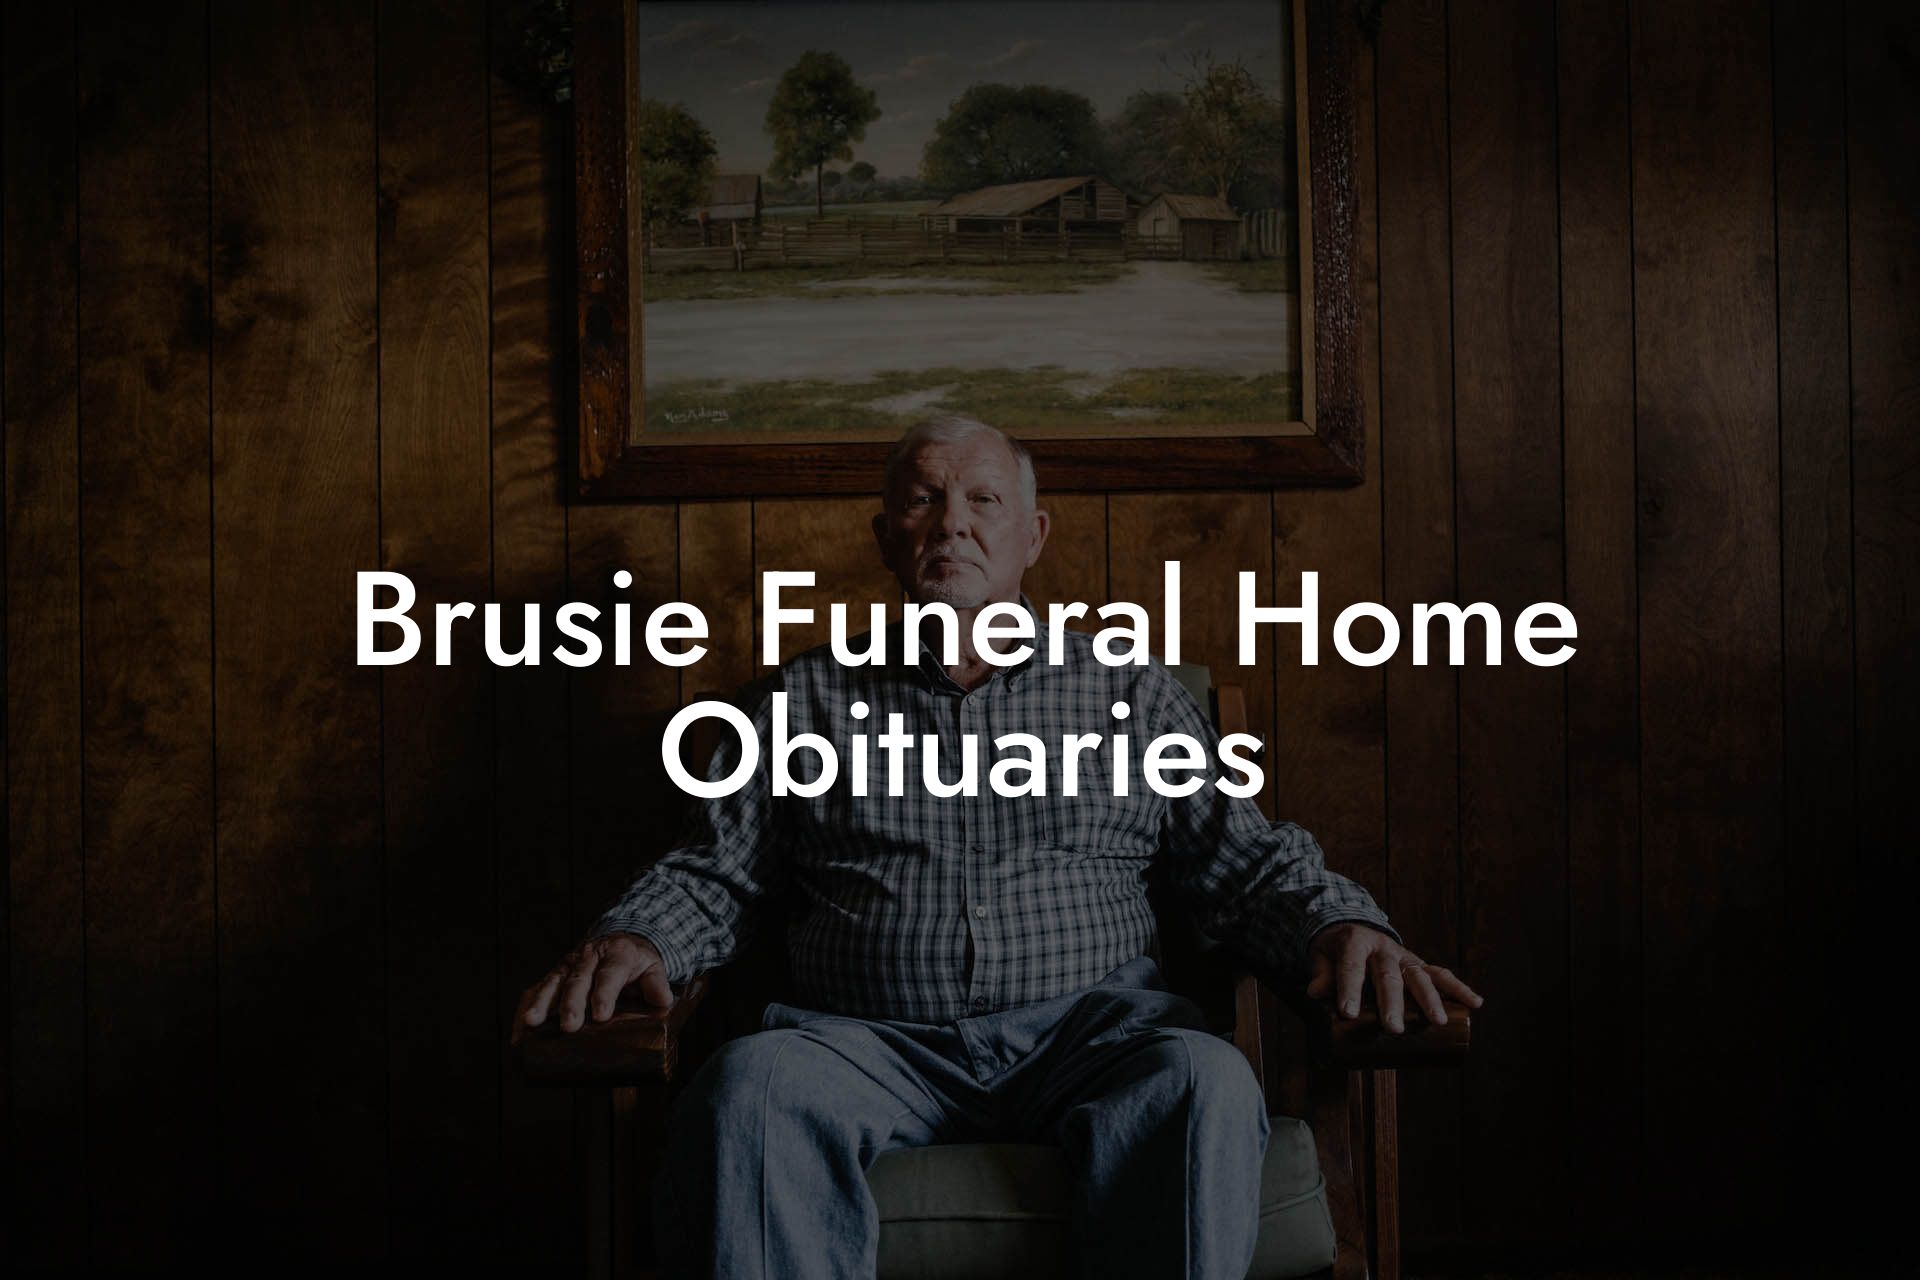 Brusie Funeral Home Obituaries